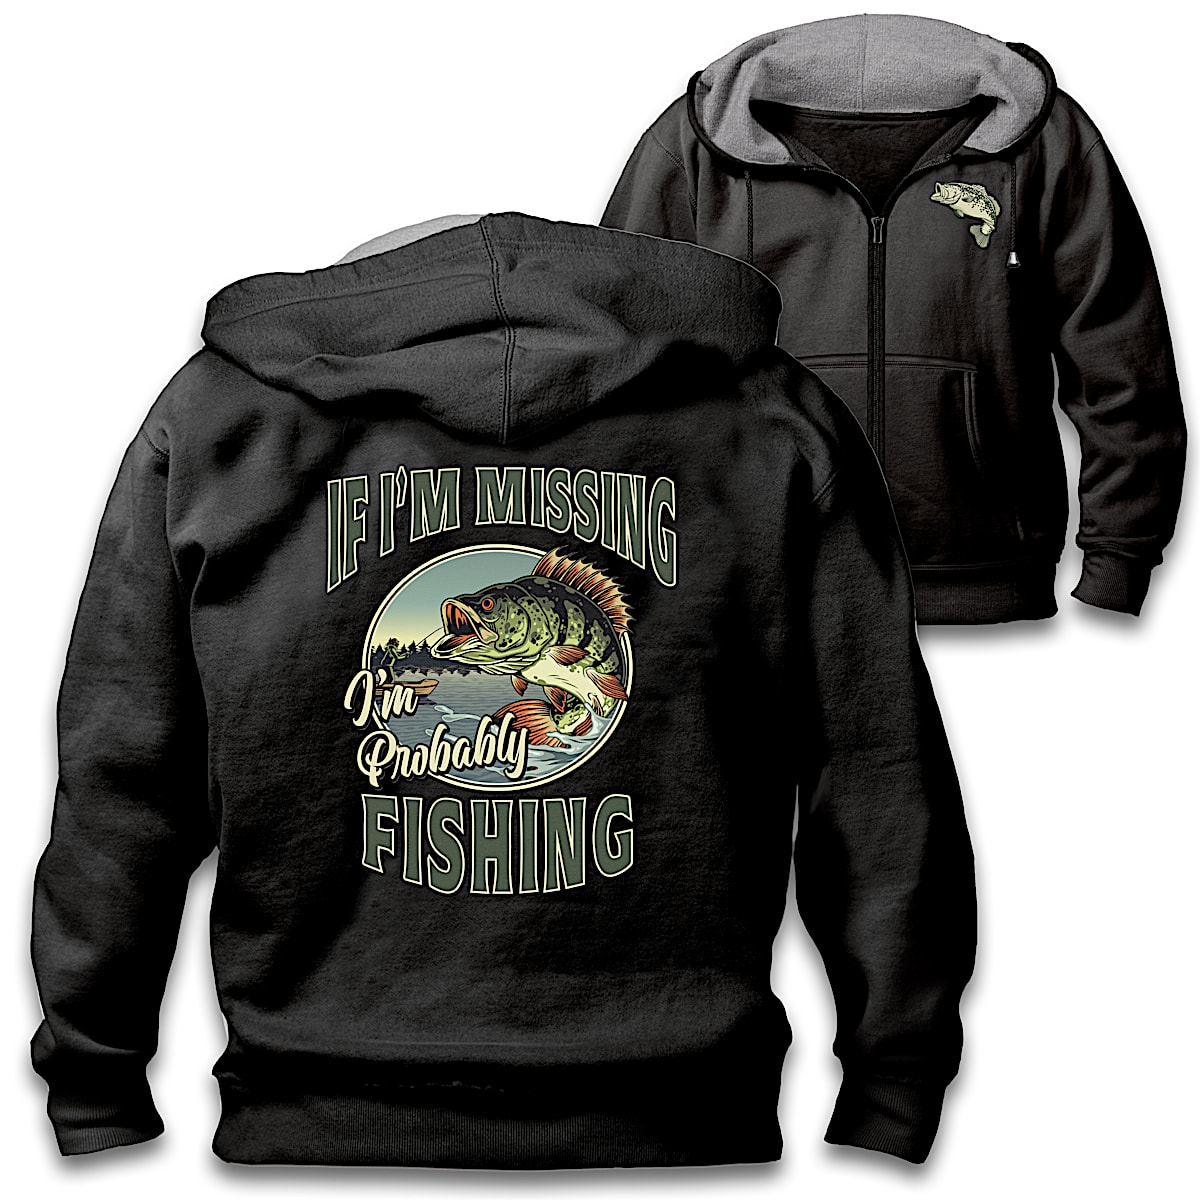 Black Gone Fishing Mens Hoodie Featuring Fishing Art Of A Big Mouth Bass